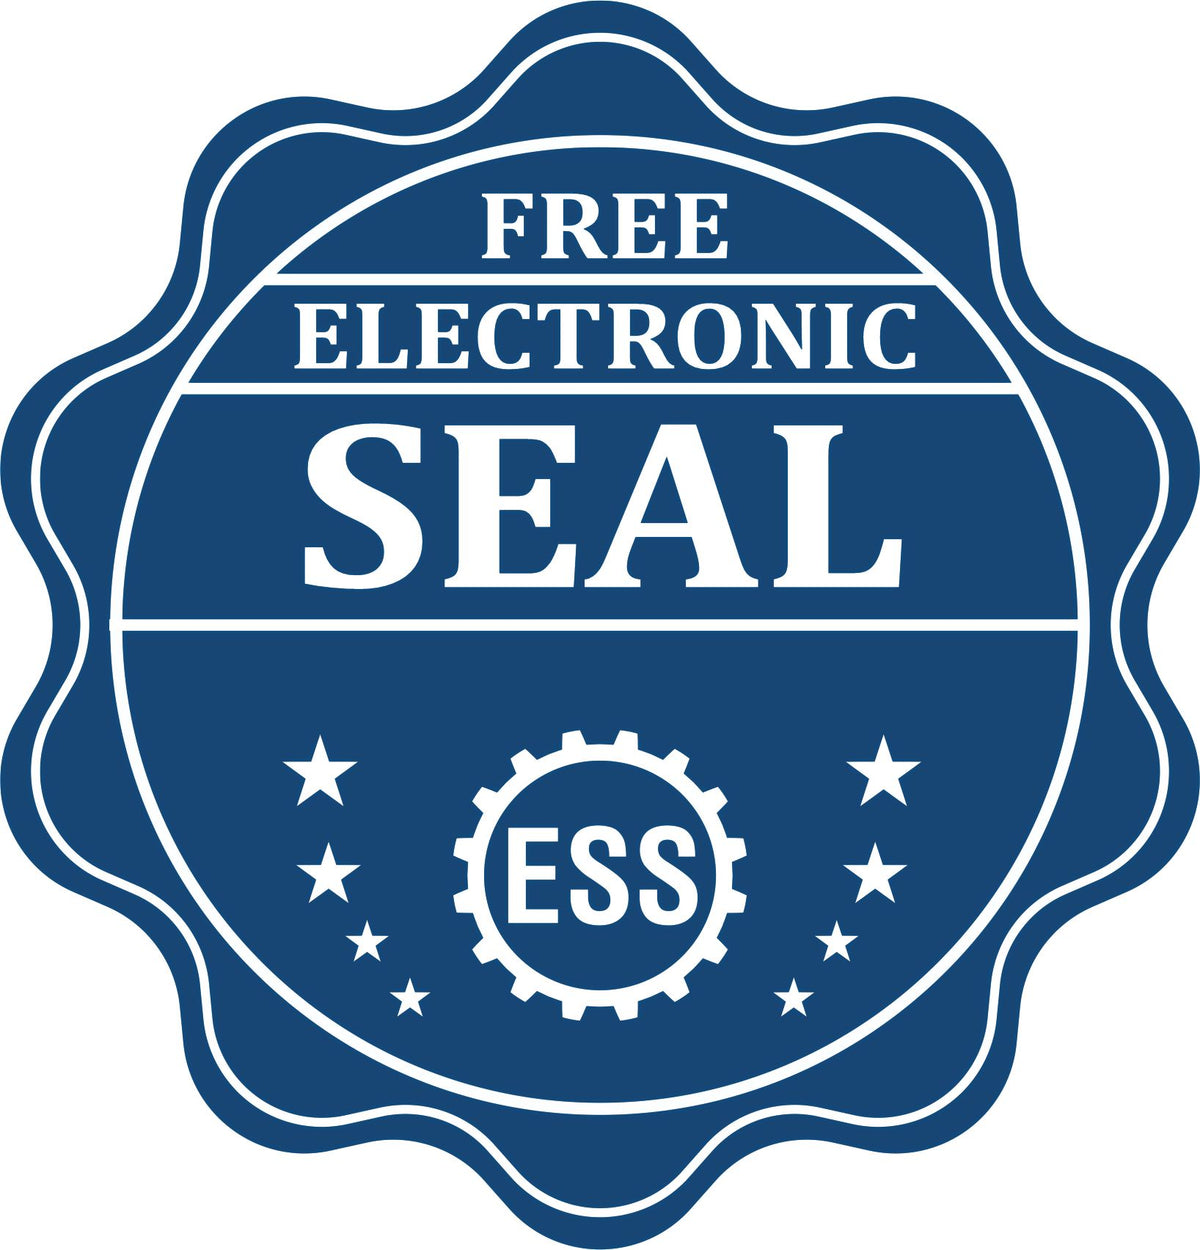 A badge showing a free electronic seal for the Heavy Duty Cast Iron Guam Land Surveyor Seal Embosser with stars and the ESS gear on the emblem.